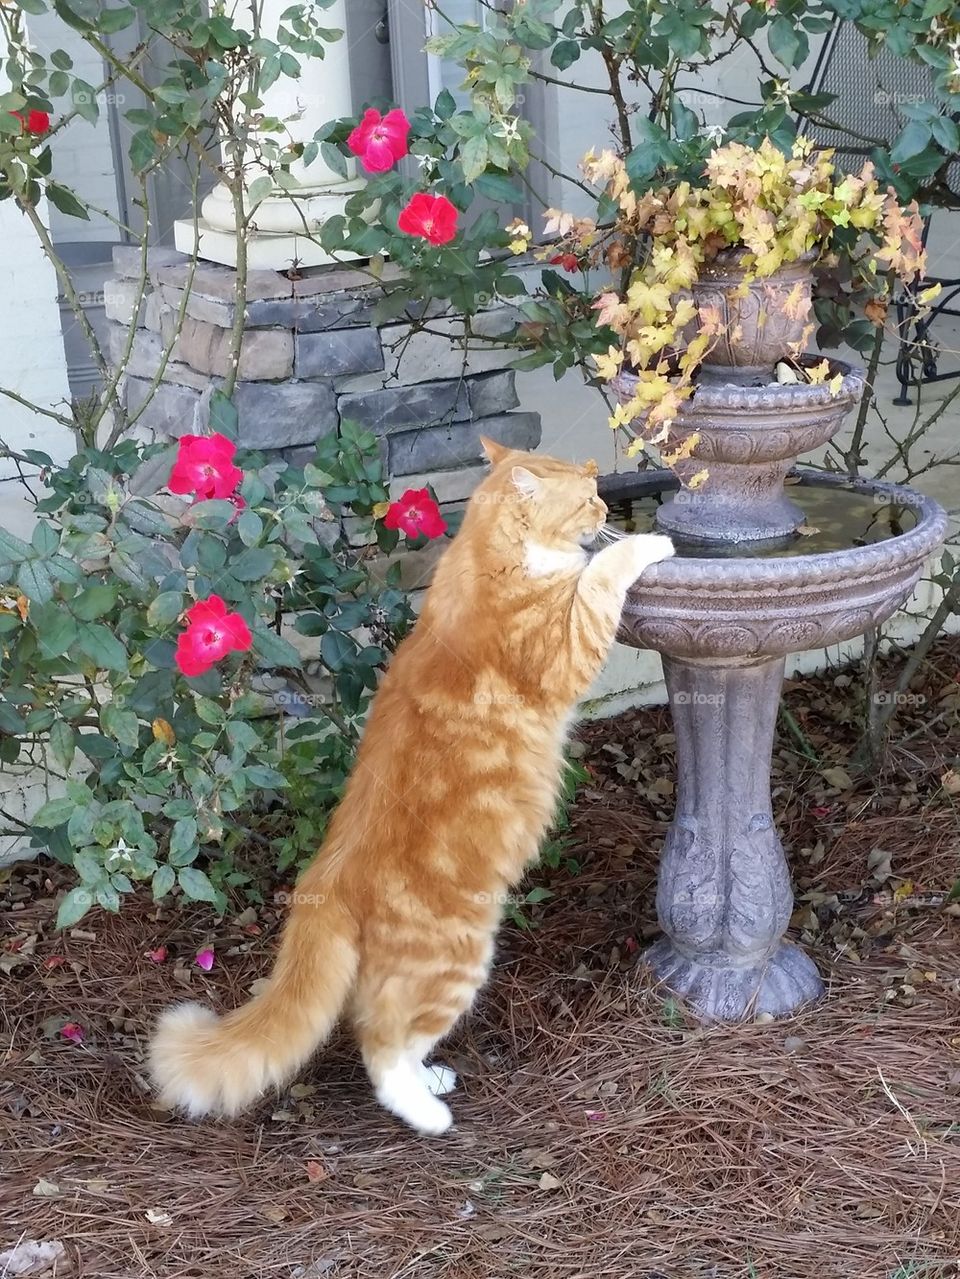 Drinking From the Fountain